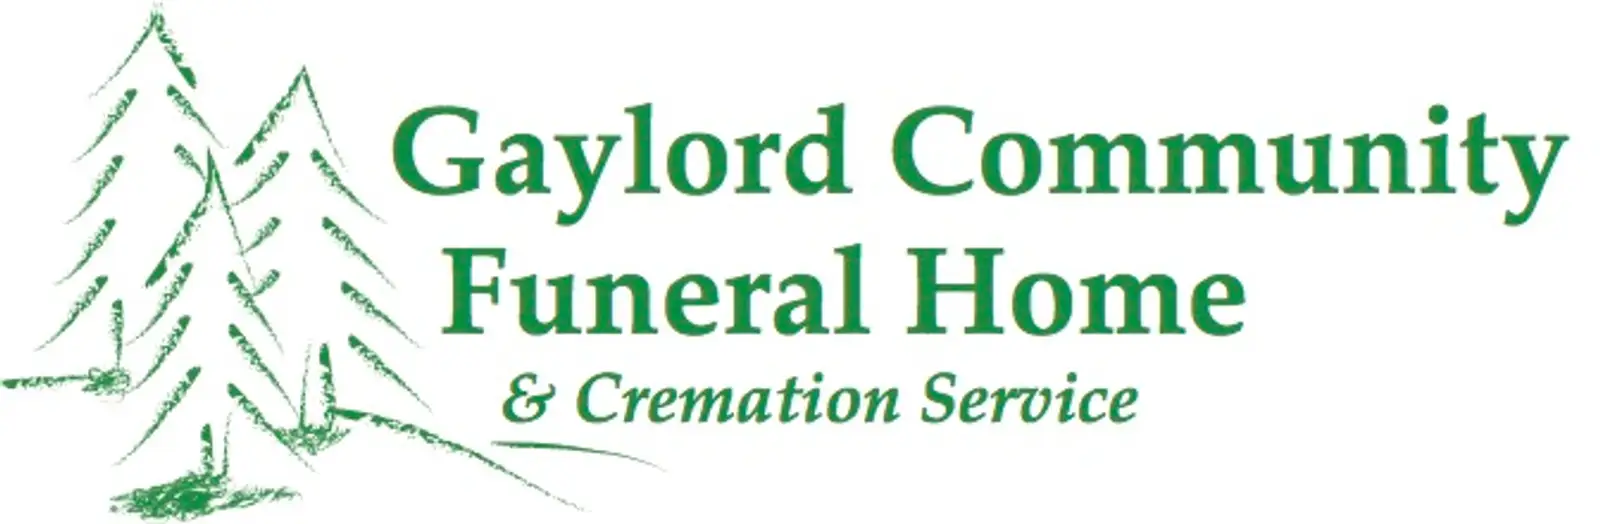 Gaylord Community Funeral Home logo